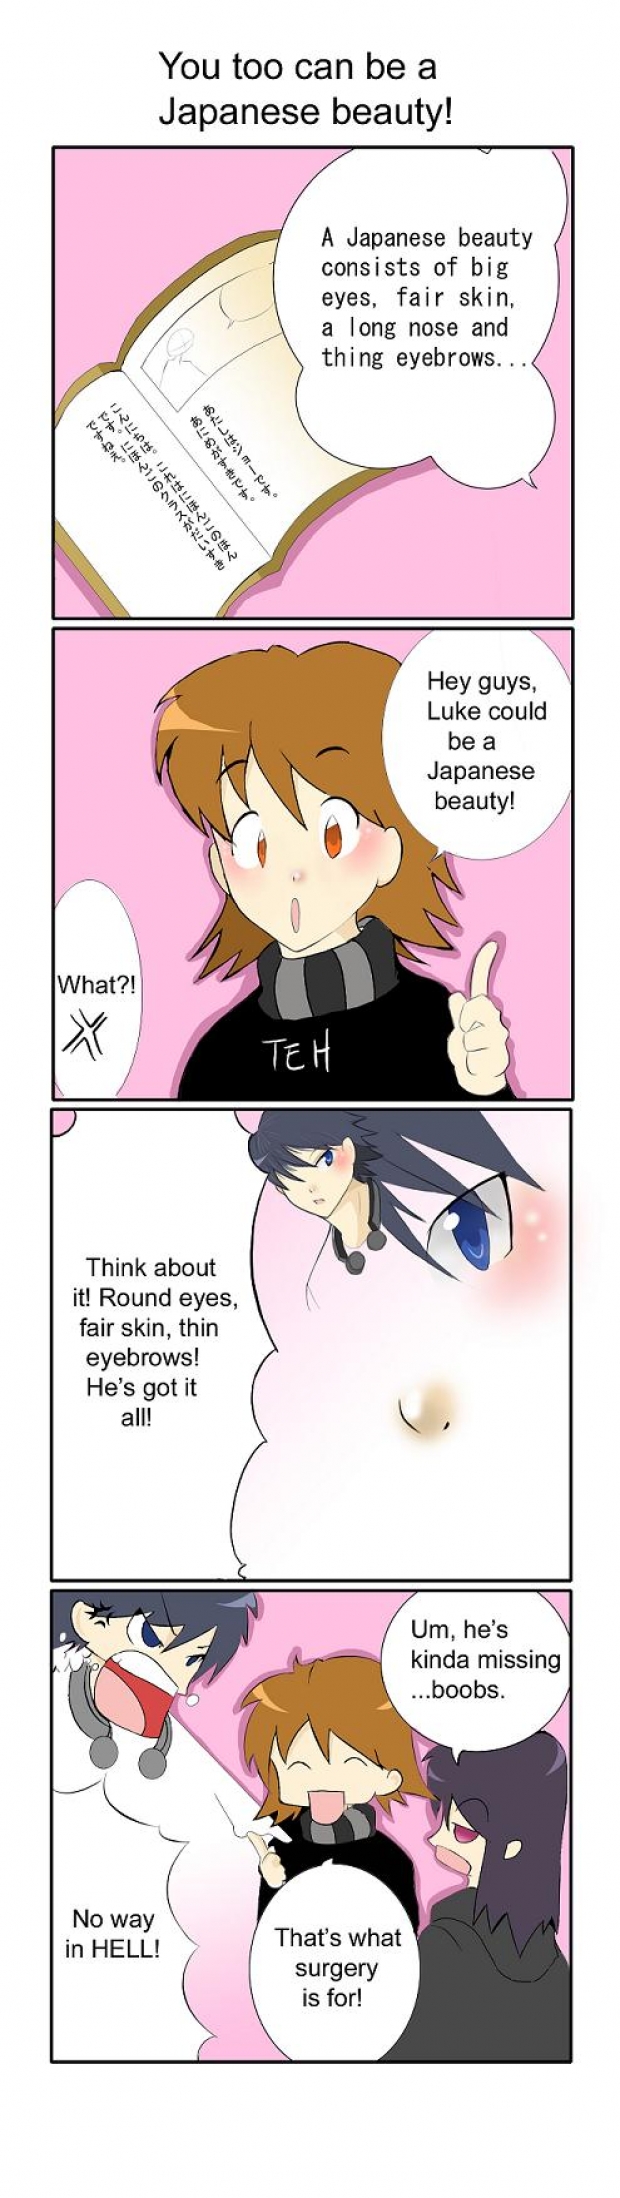 You too can be a Japanese Beauty!